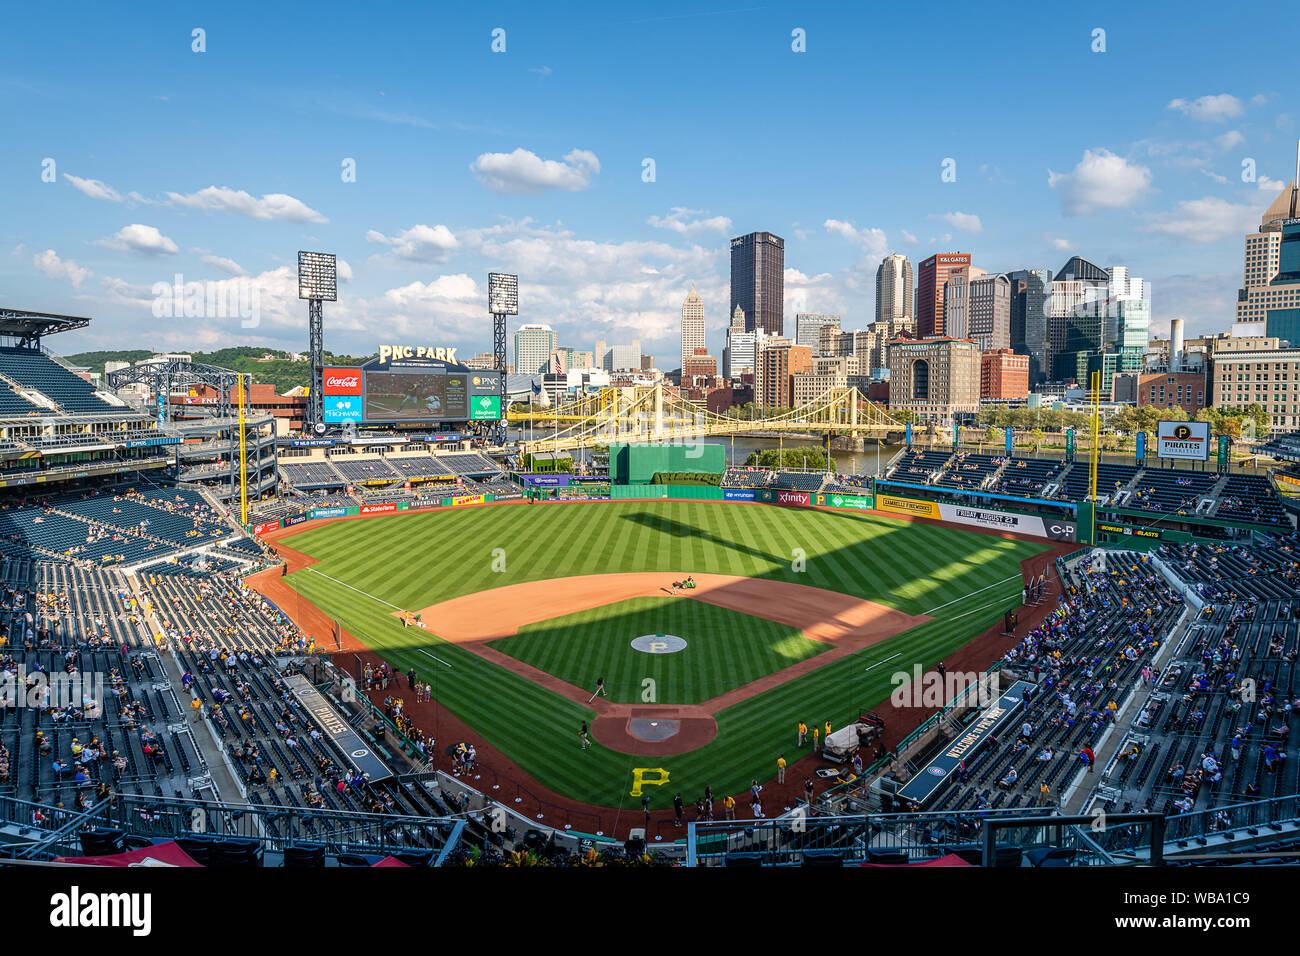 PNC Park, Home of the Pittsburgh Pirates - SportsRec